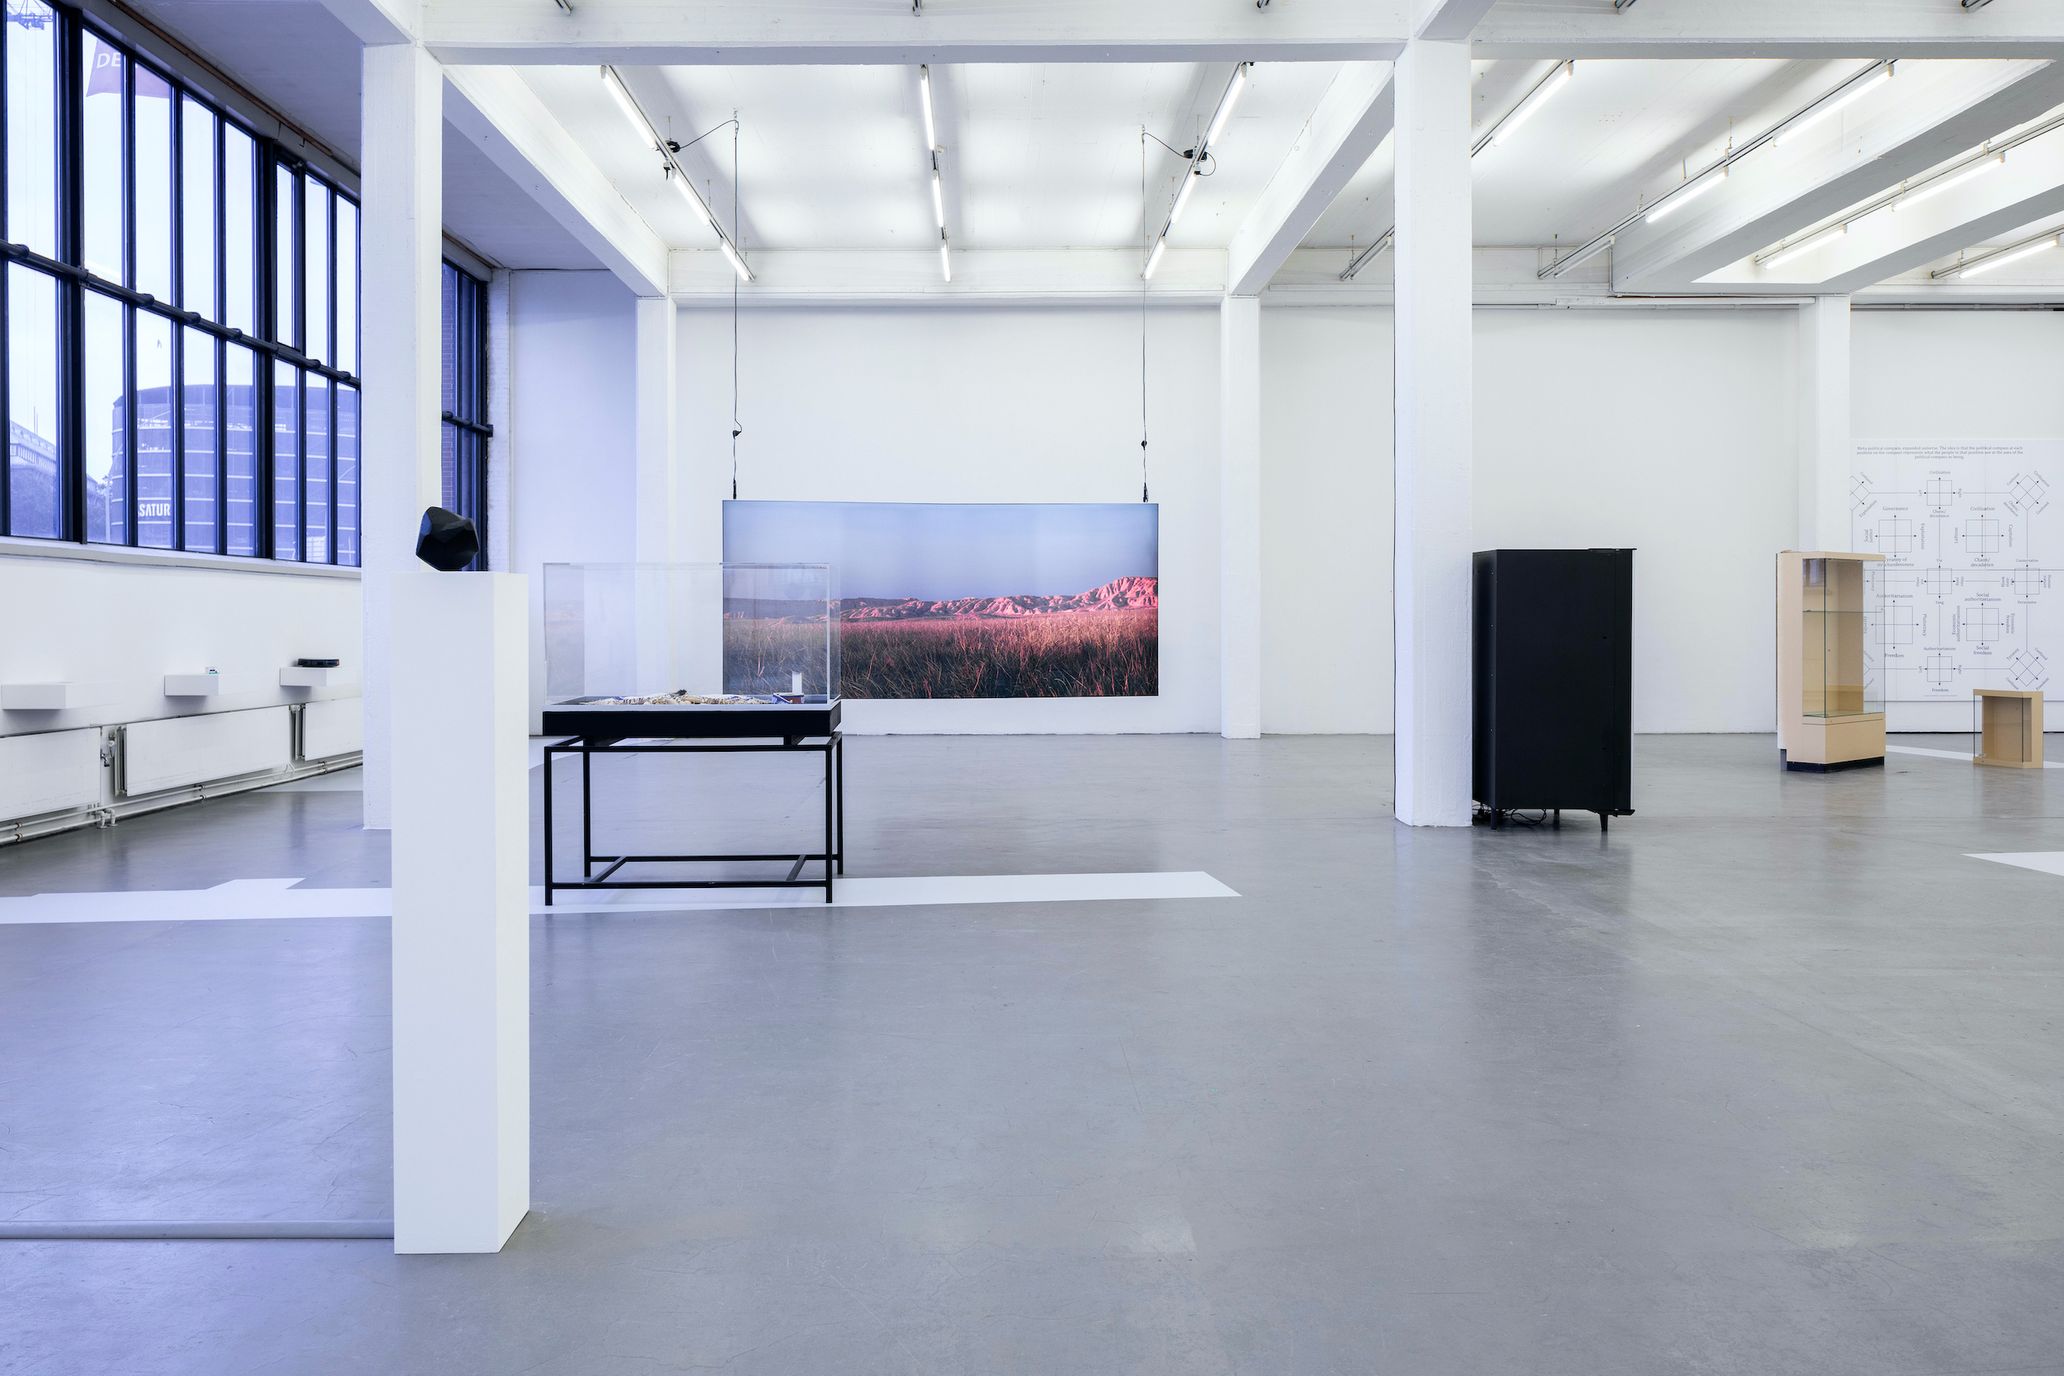 Proof of Stake
Installation View, Proof of Stake – Technological Claims, Kunstverein in Hamburg, 2021
Photography Fred Dott